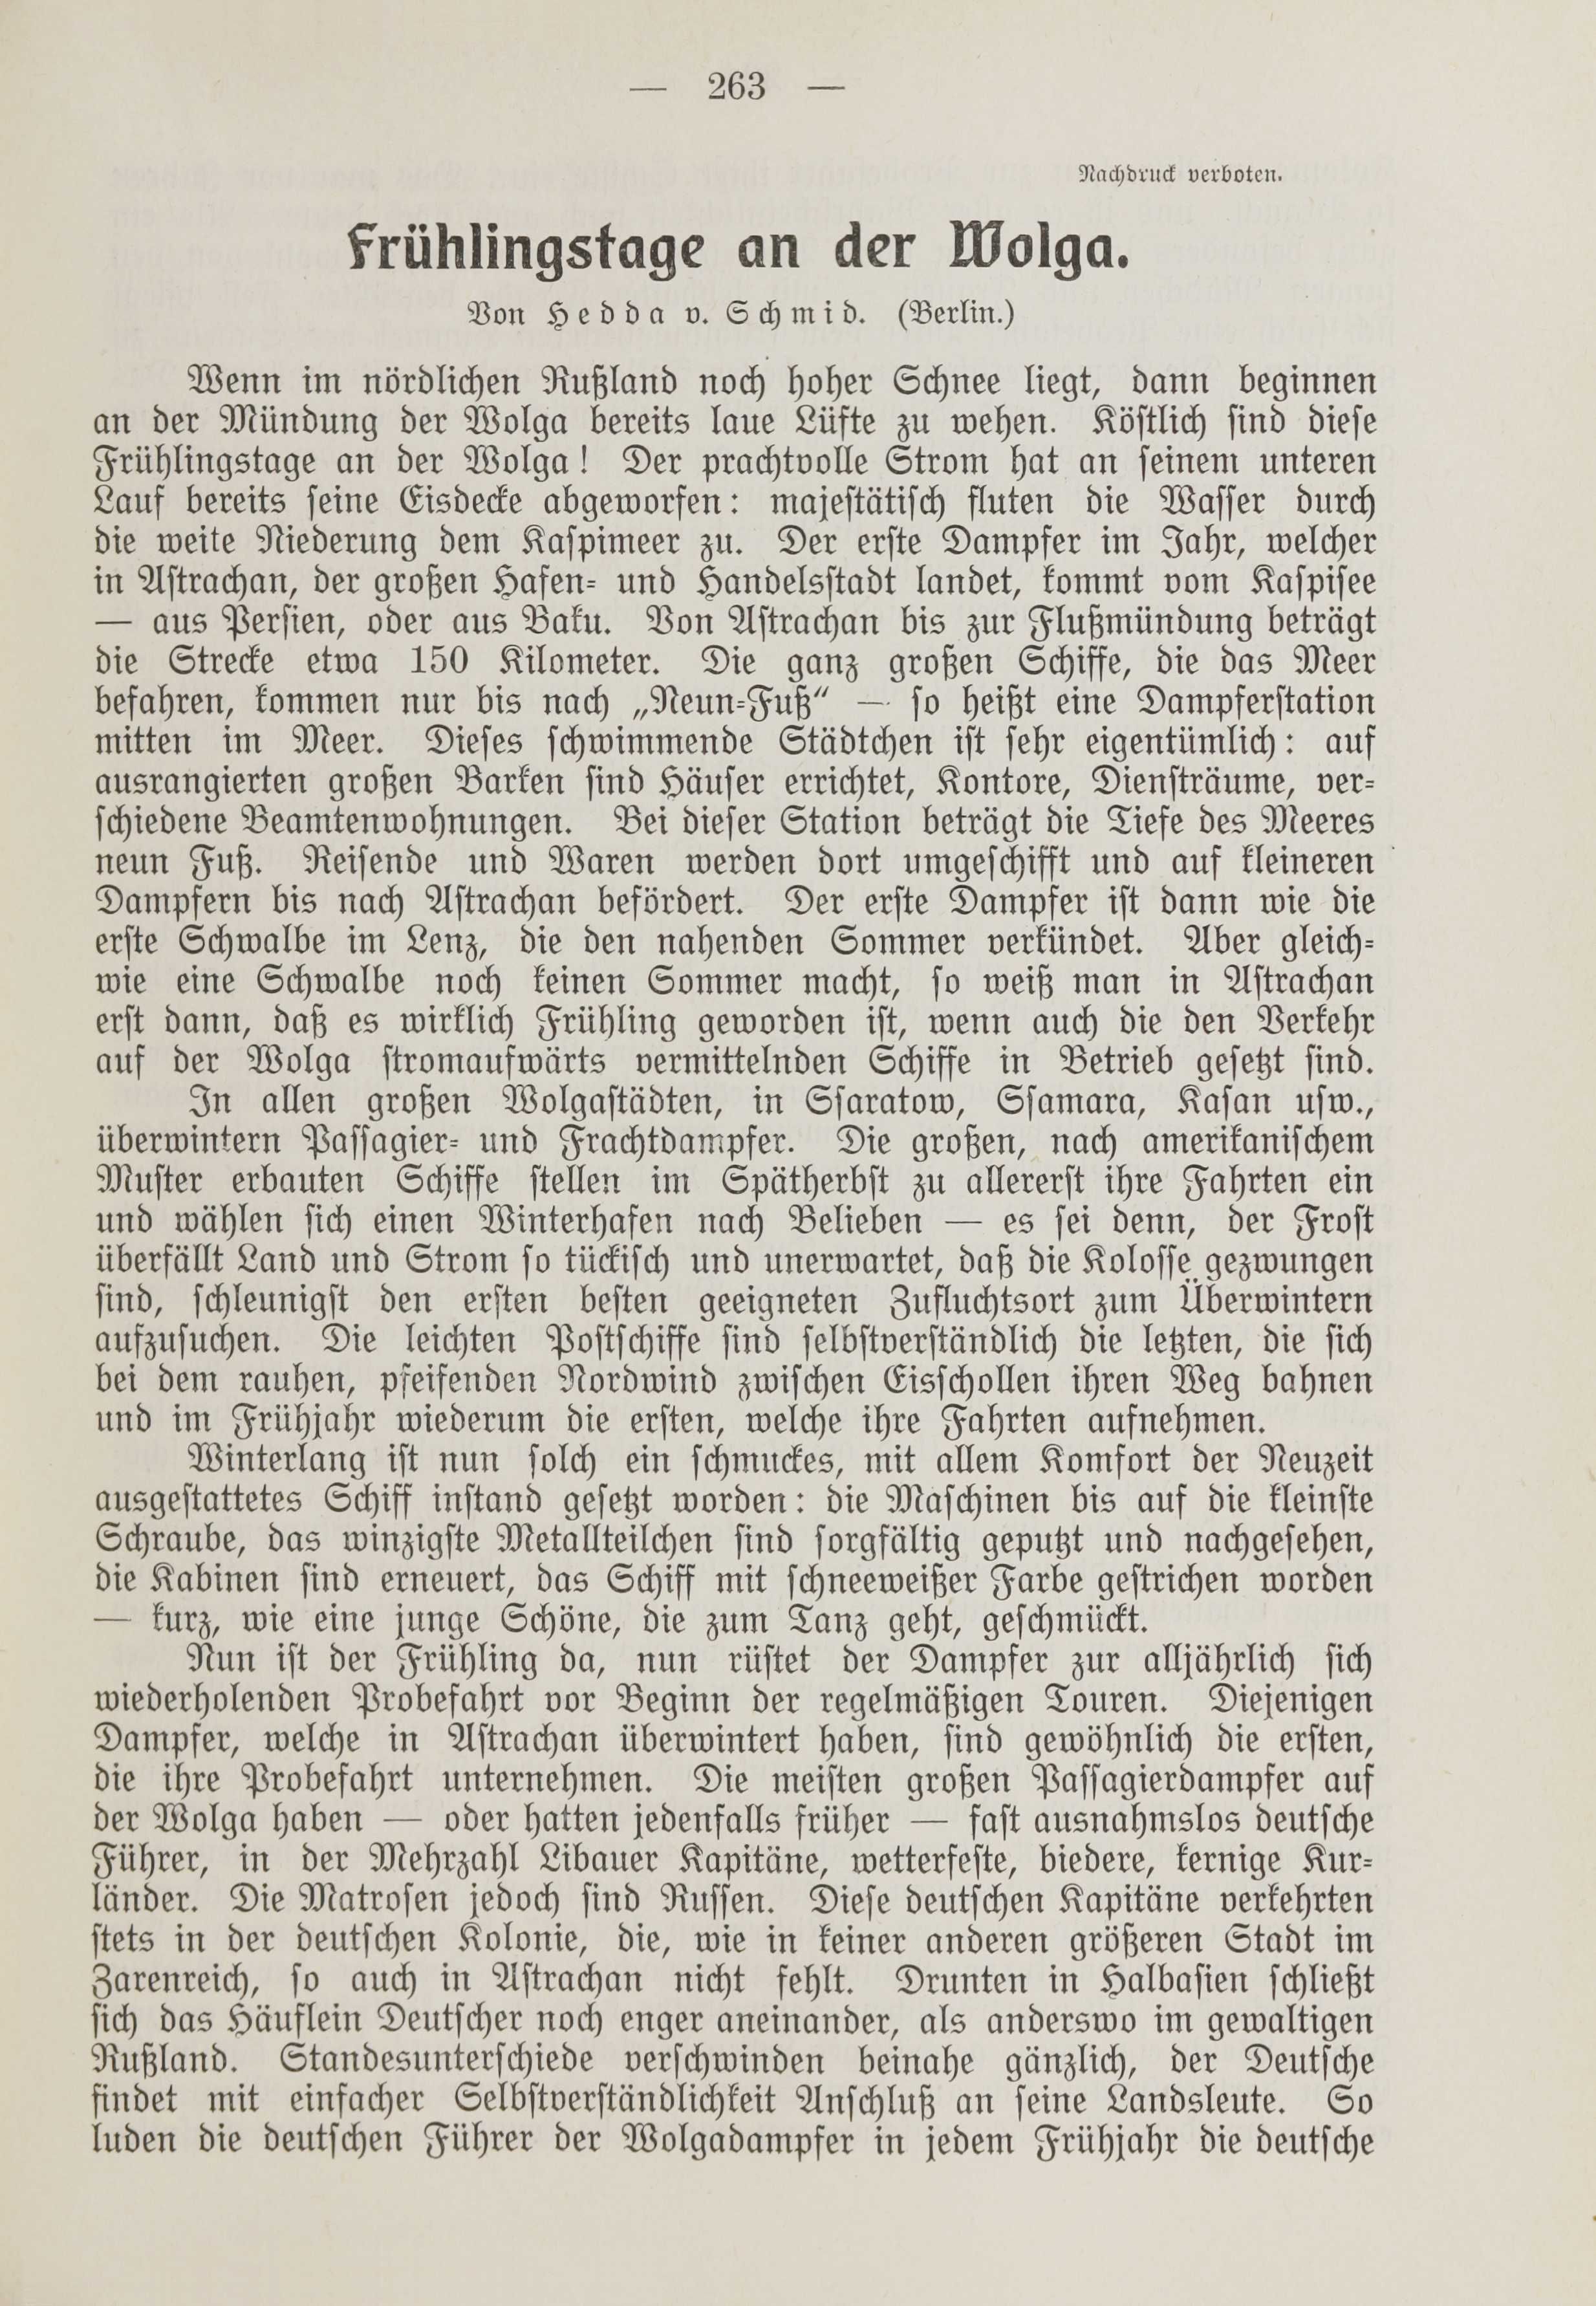 Frühlingstage an der Wolga (1912) | 1. (263) Main body of text